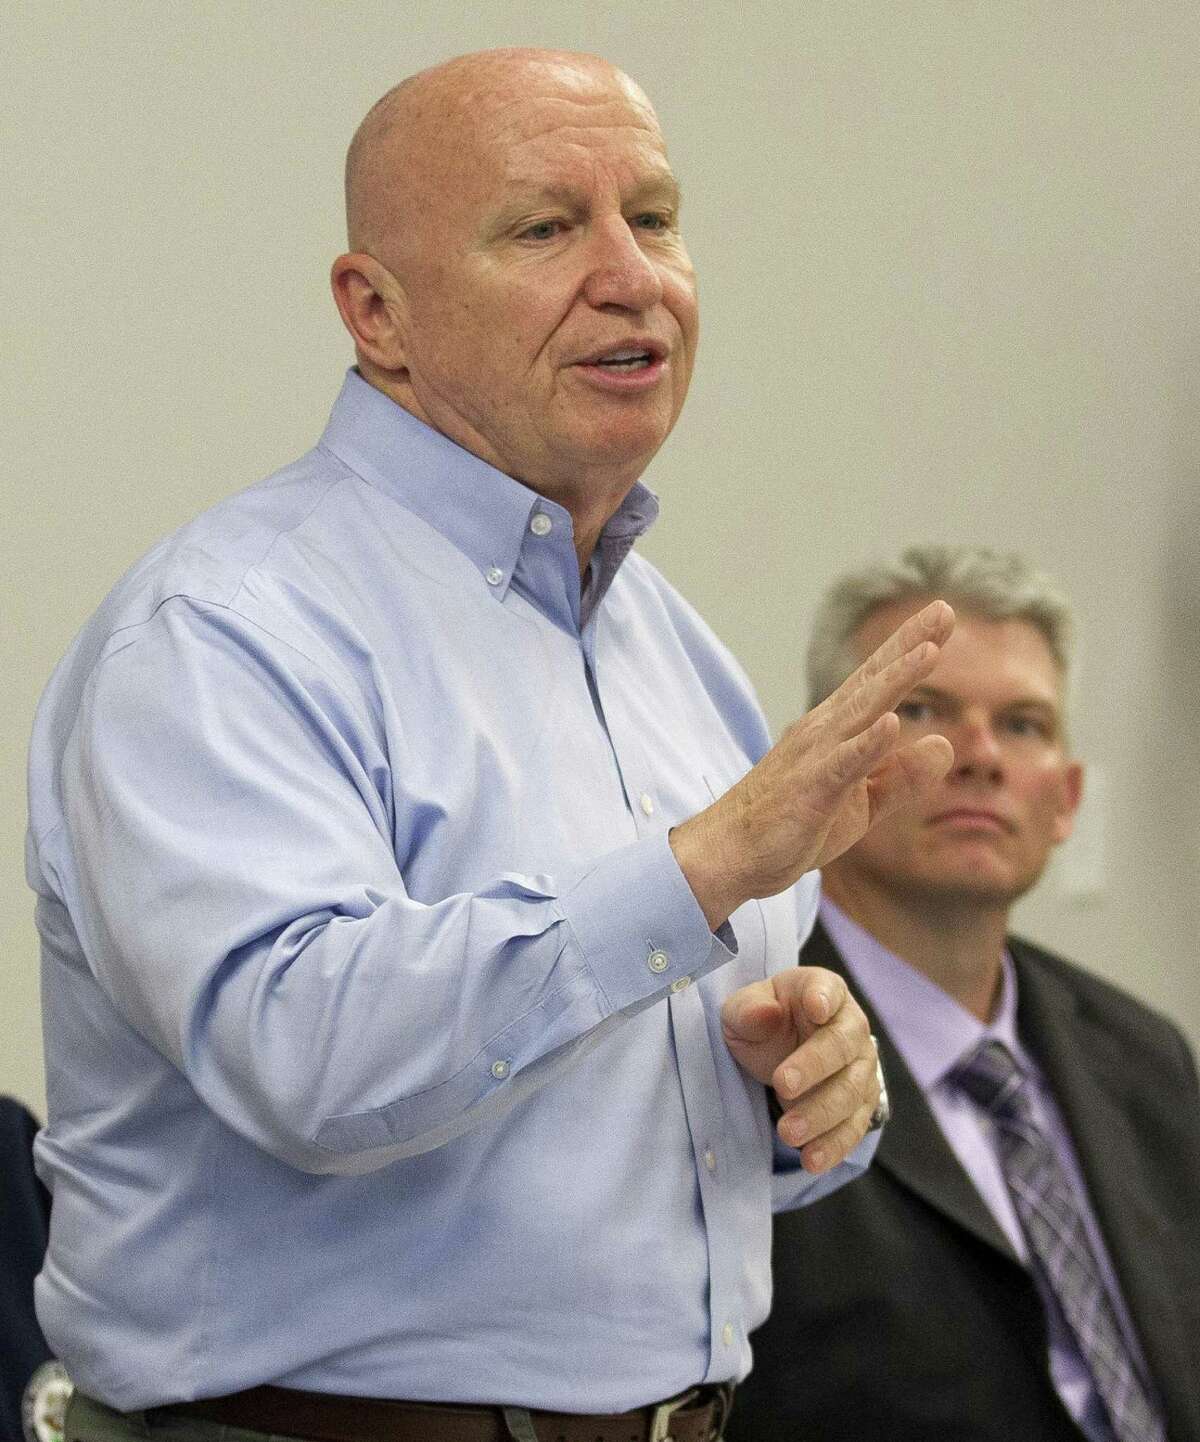 House Ways and Means Committee Chairman Rep. Kevin Brady, R-The Woodlands, addresses business leaders' concerns about repealing and replacing the Affordable Care Act as J.J. Hollie, president of The Woodlands Area Chamber of Commerce, looks on at The Woodlands Area Chamber of Commerce Tuesday, Jan. 17, 2017, in The Woodlands.